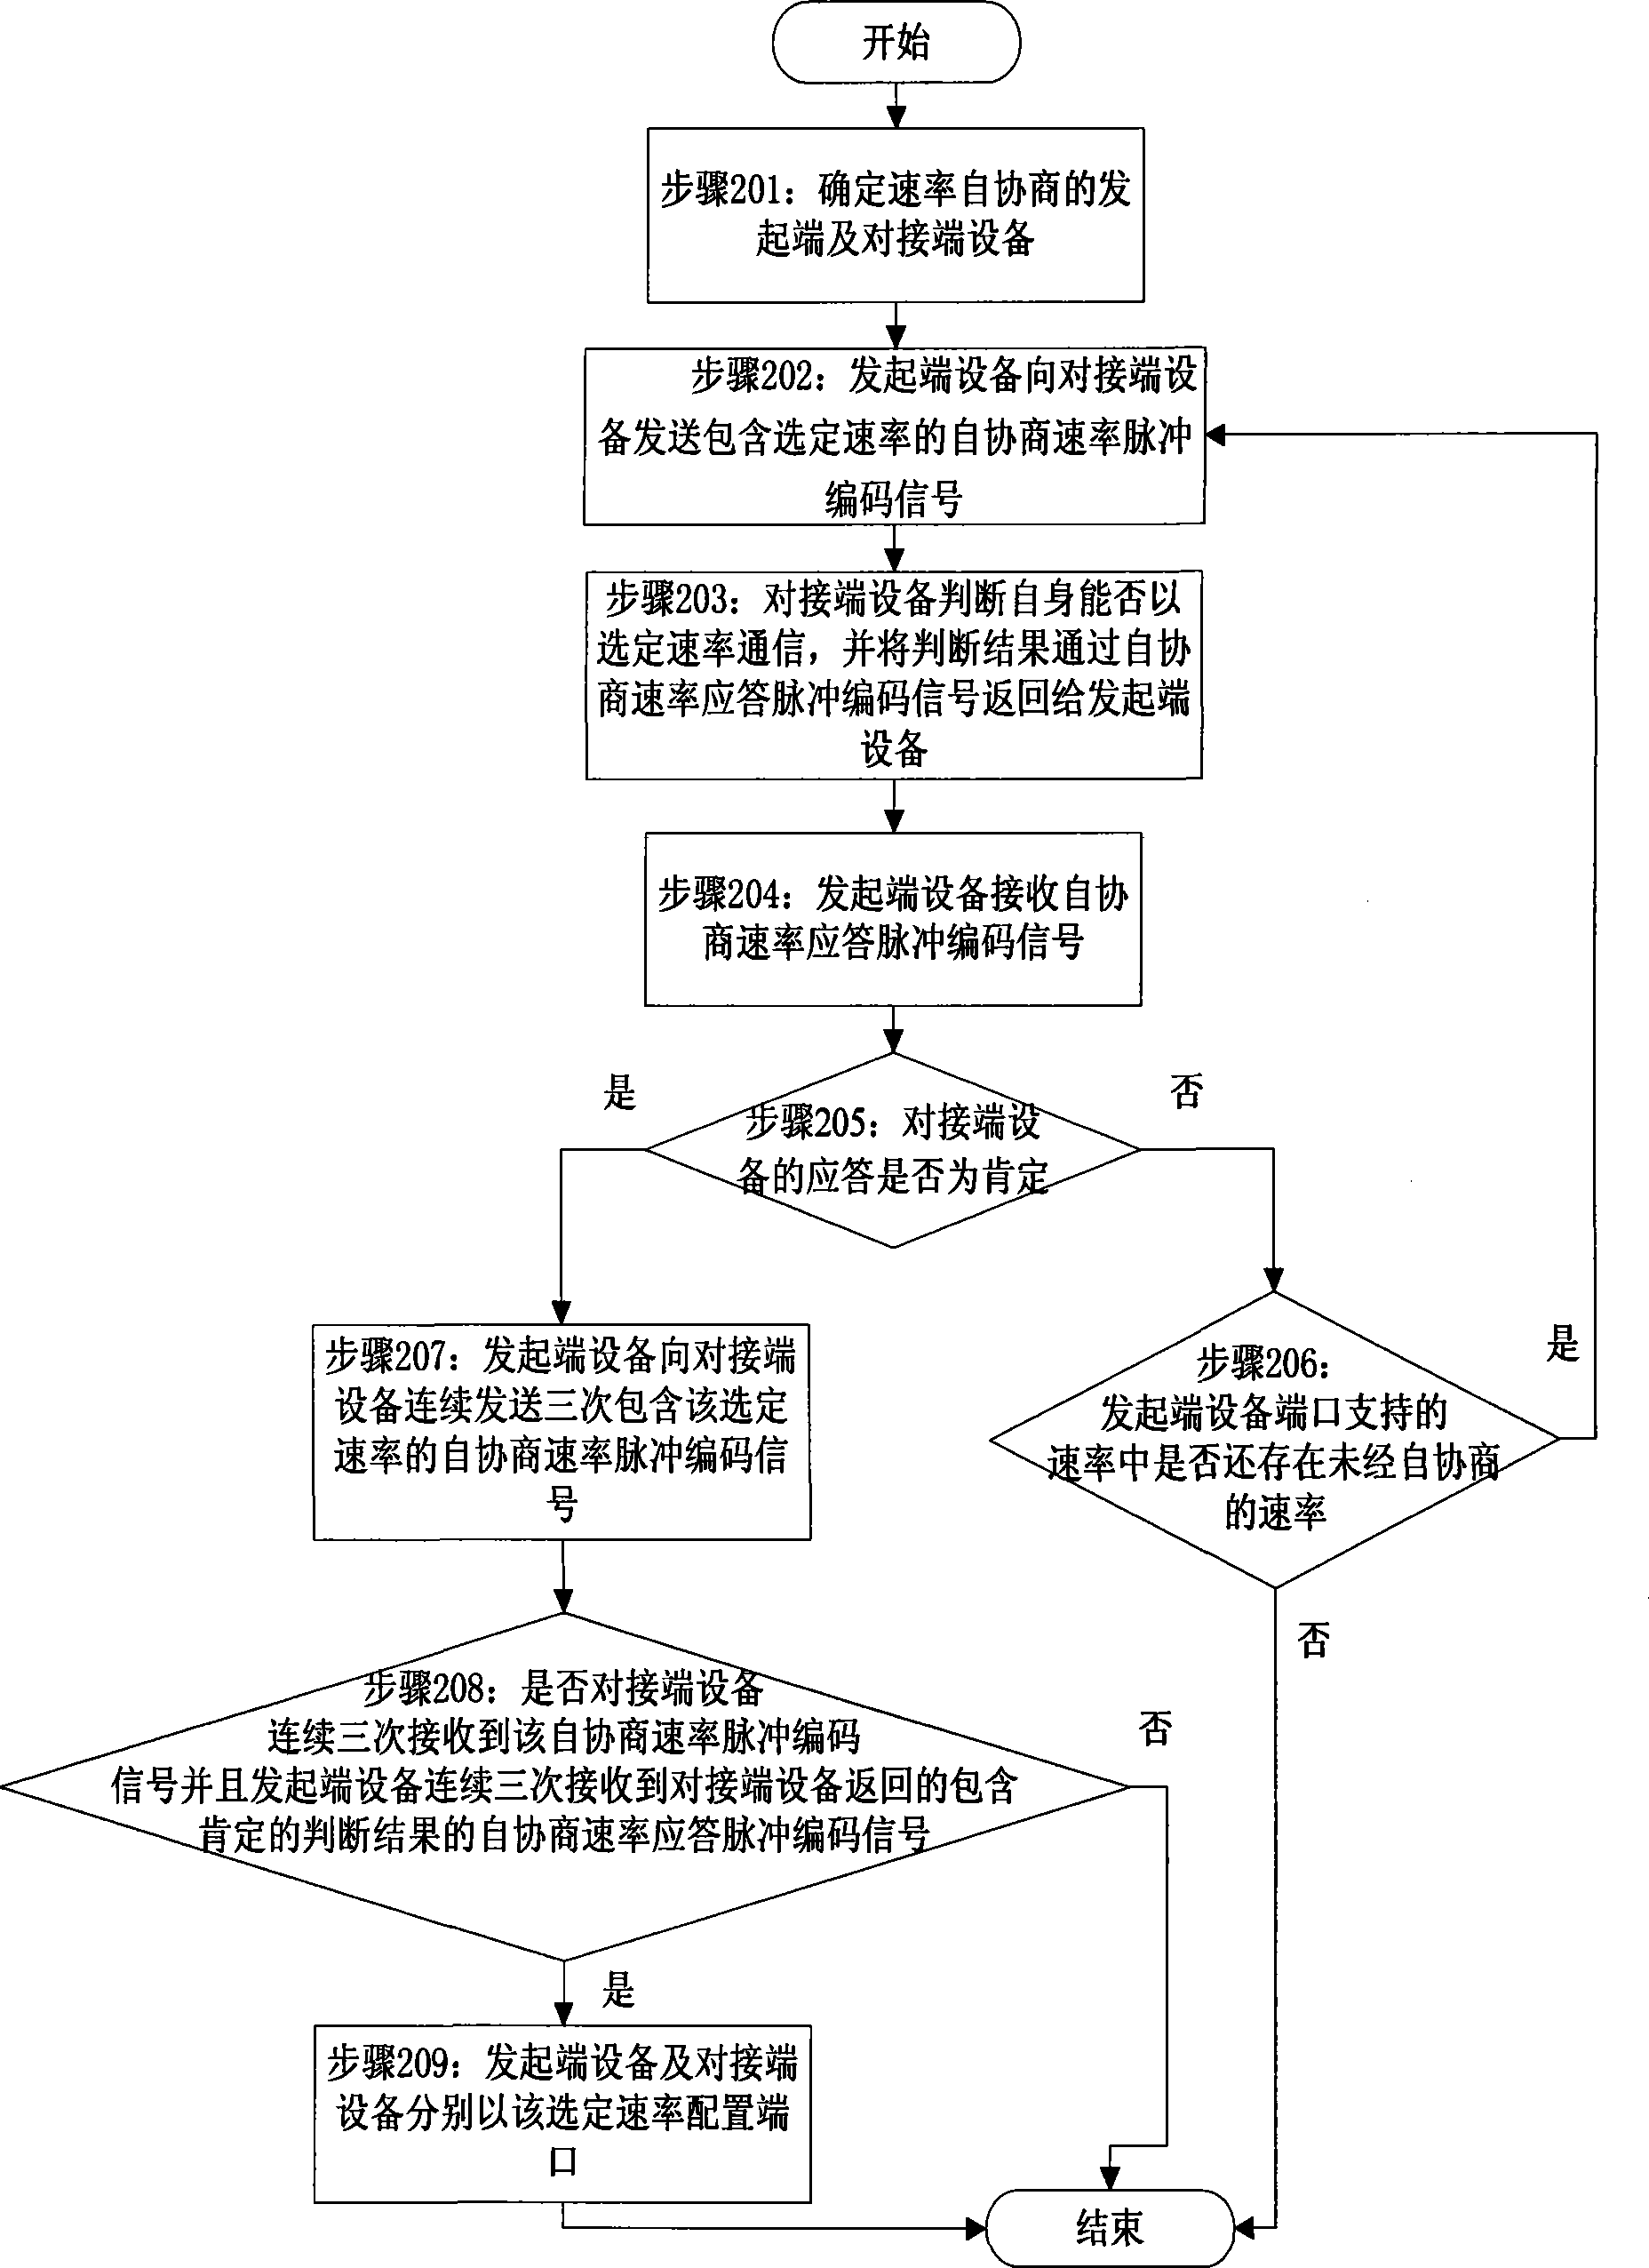 Self-negotiation method for implementing high speed communication equipment velocity